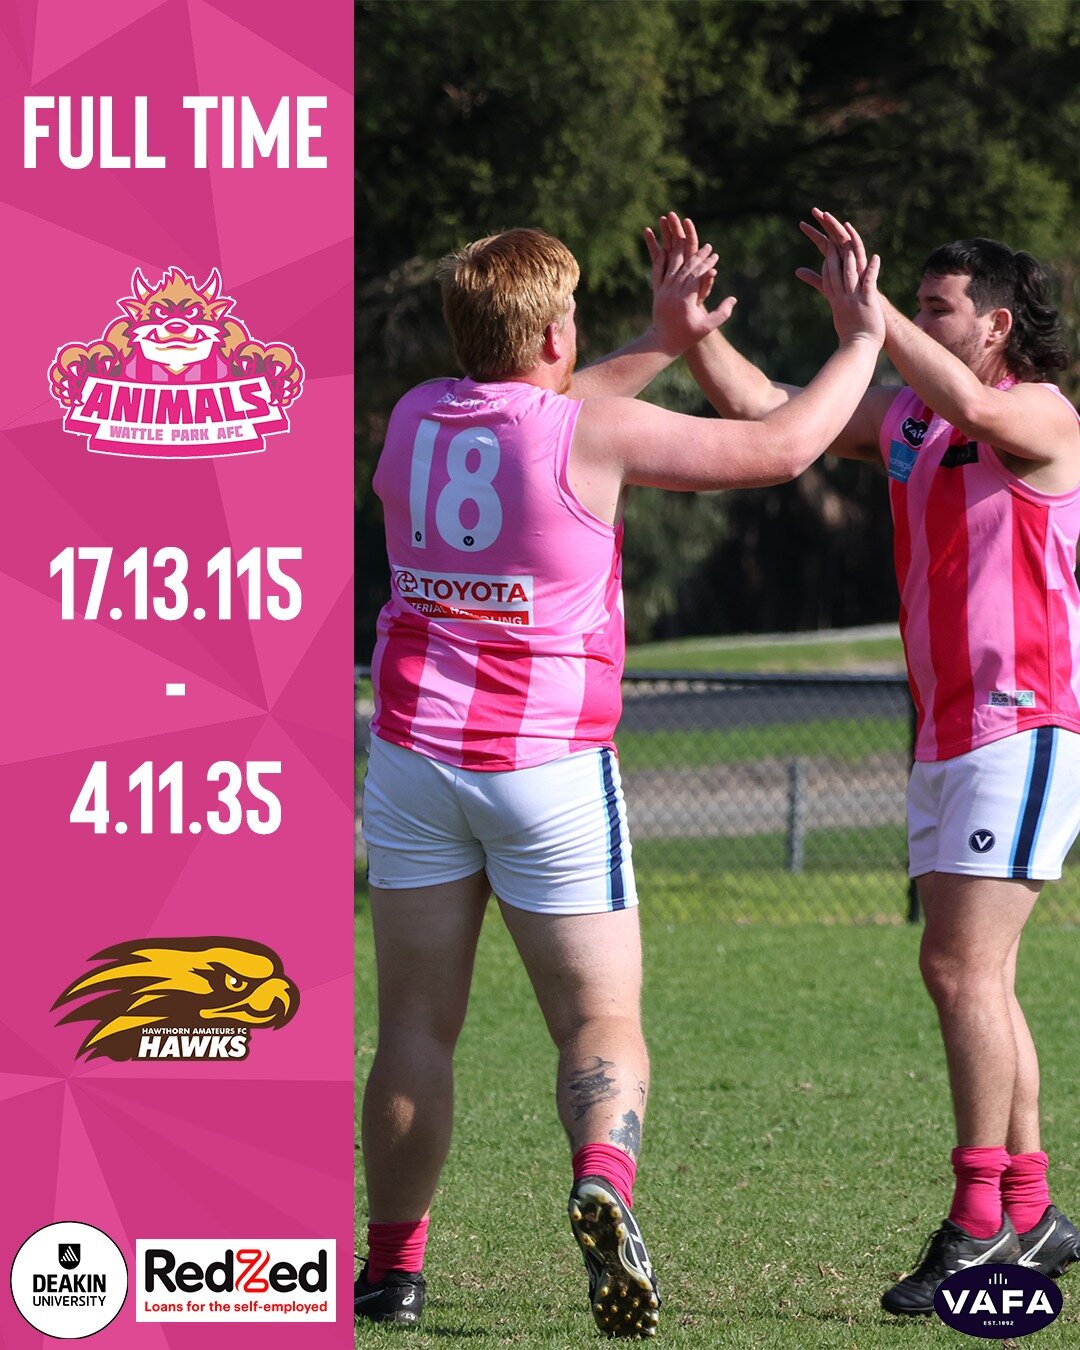 RESERVES

Another solid win by the Twos

#WPvHAW #AnimalsFooty